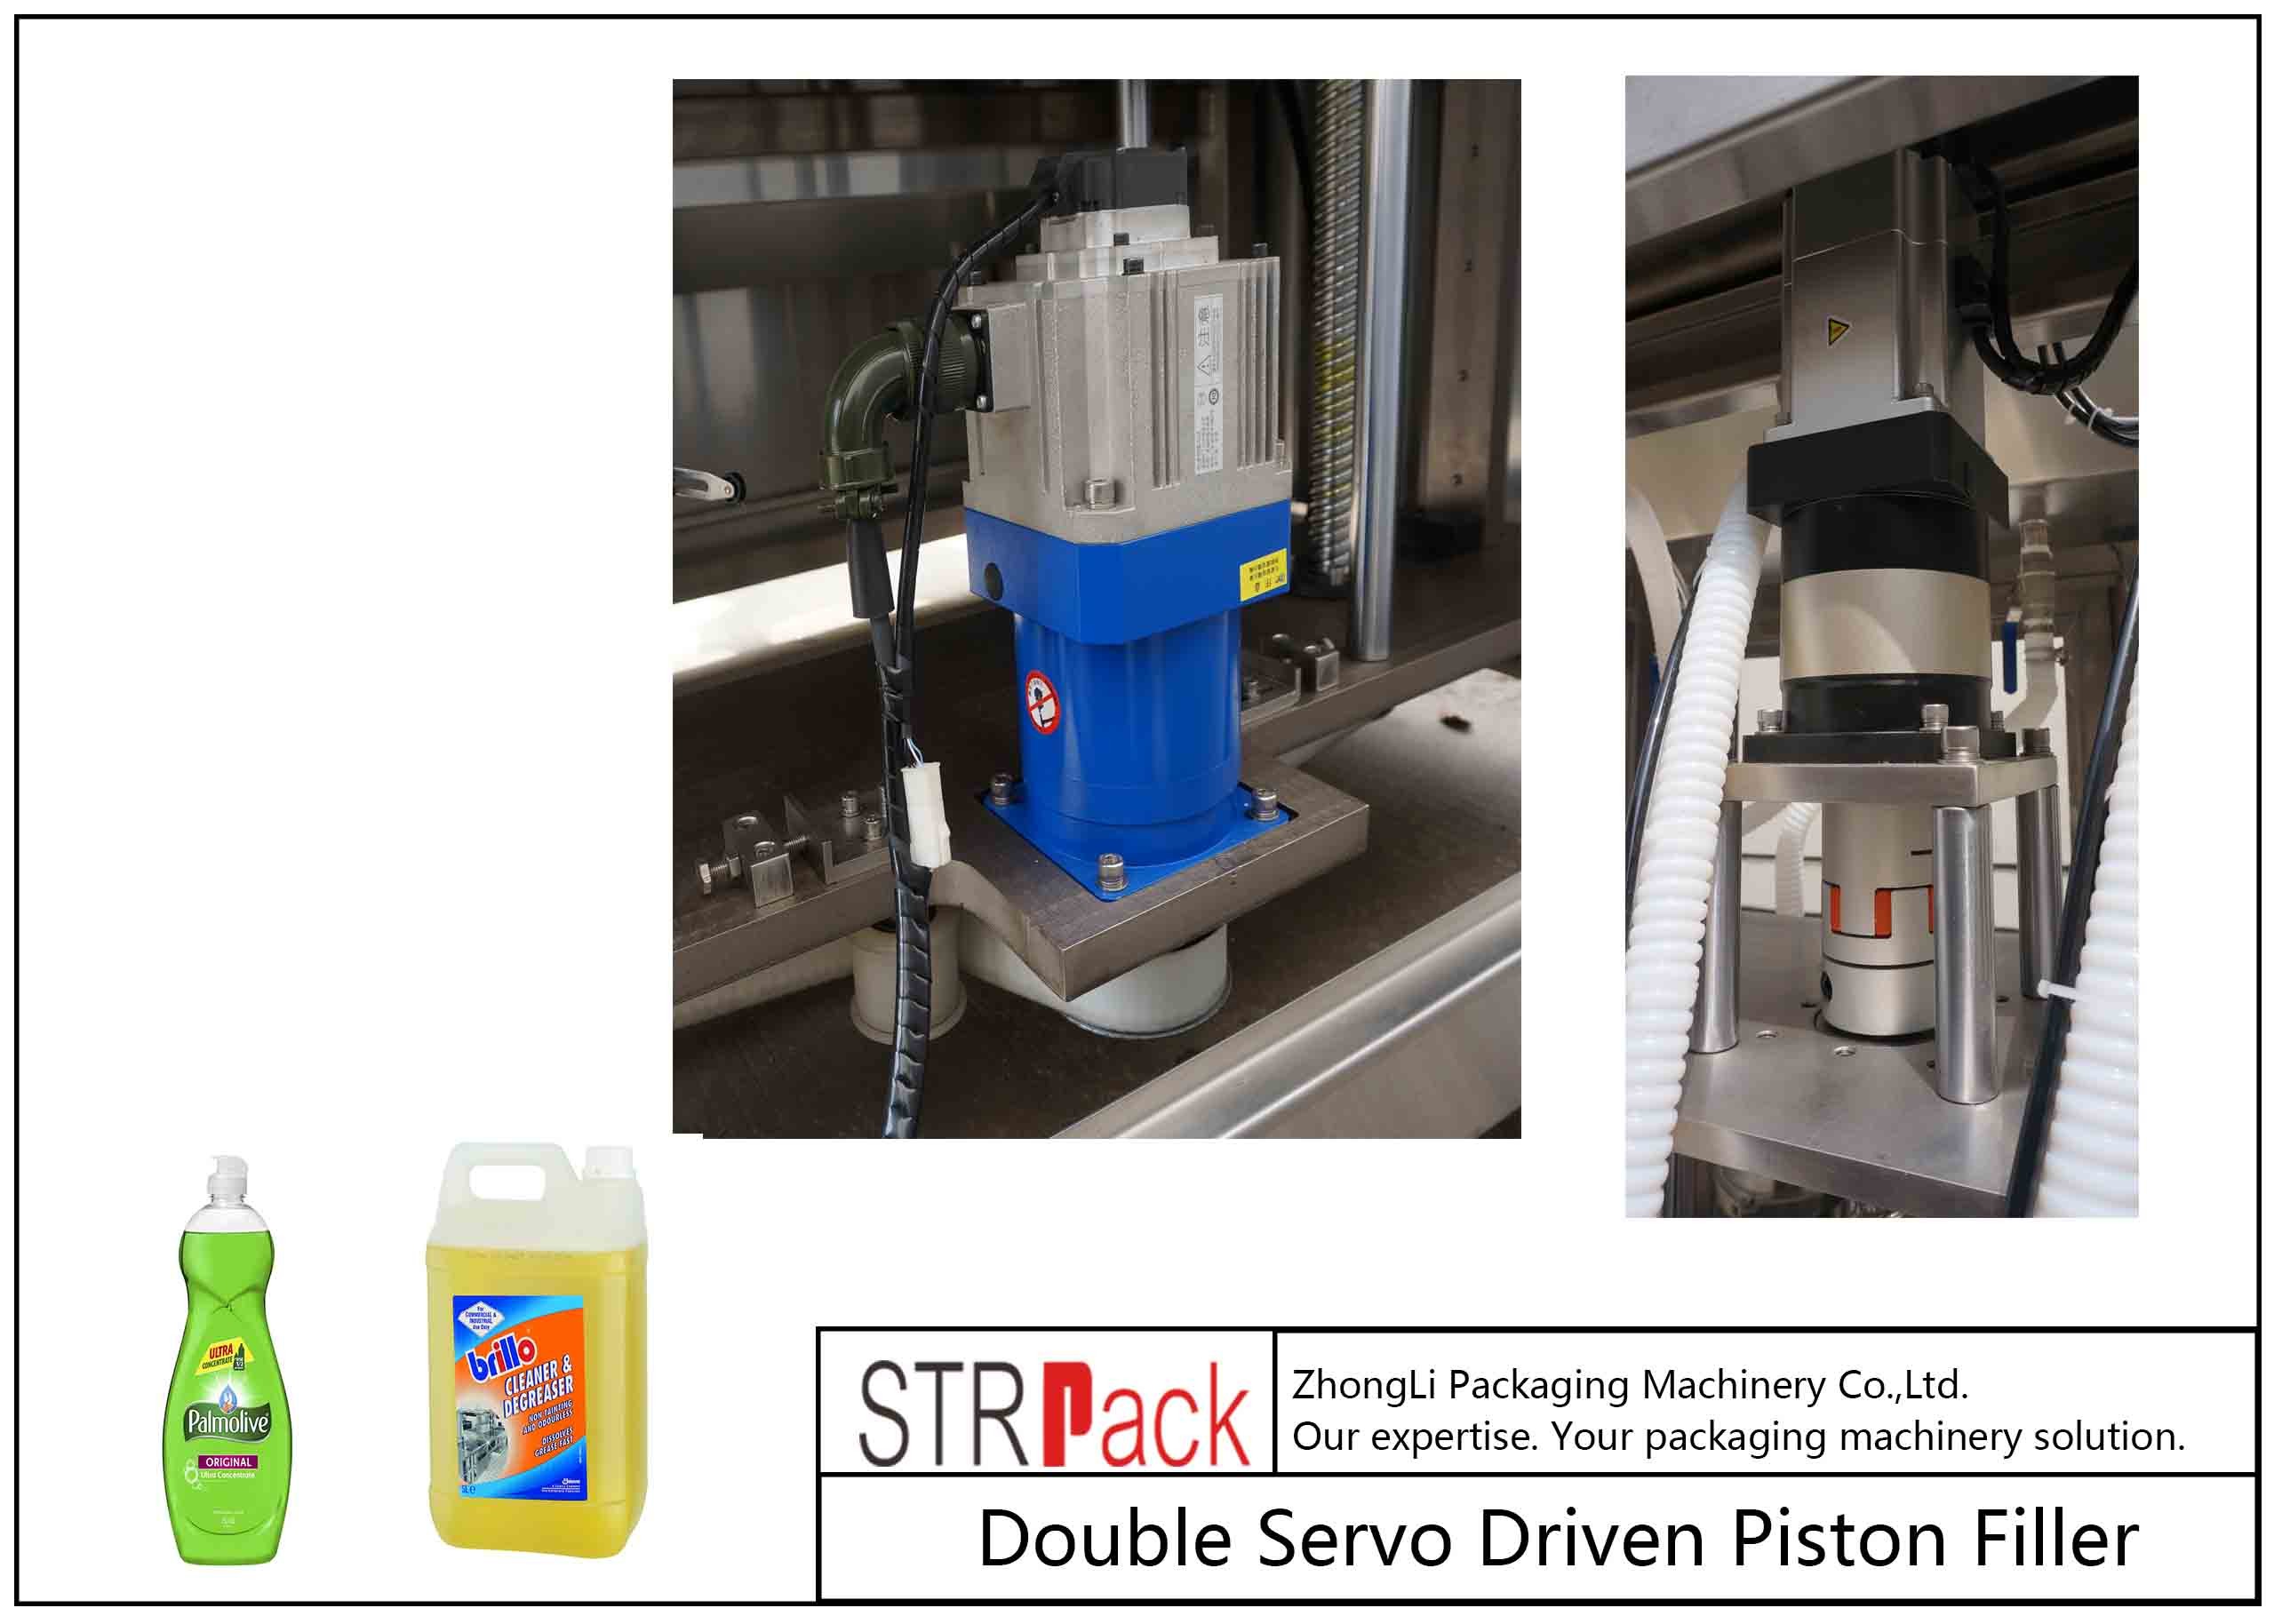 China Liquid Cleaner Linear 6 Heads Paste Filling Machine Double Servo Driven wholesale